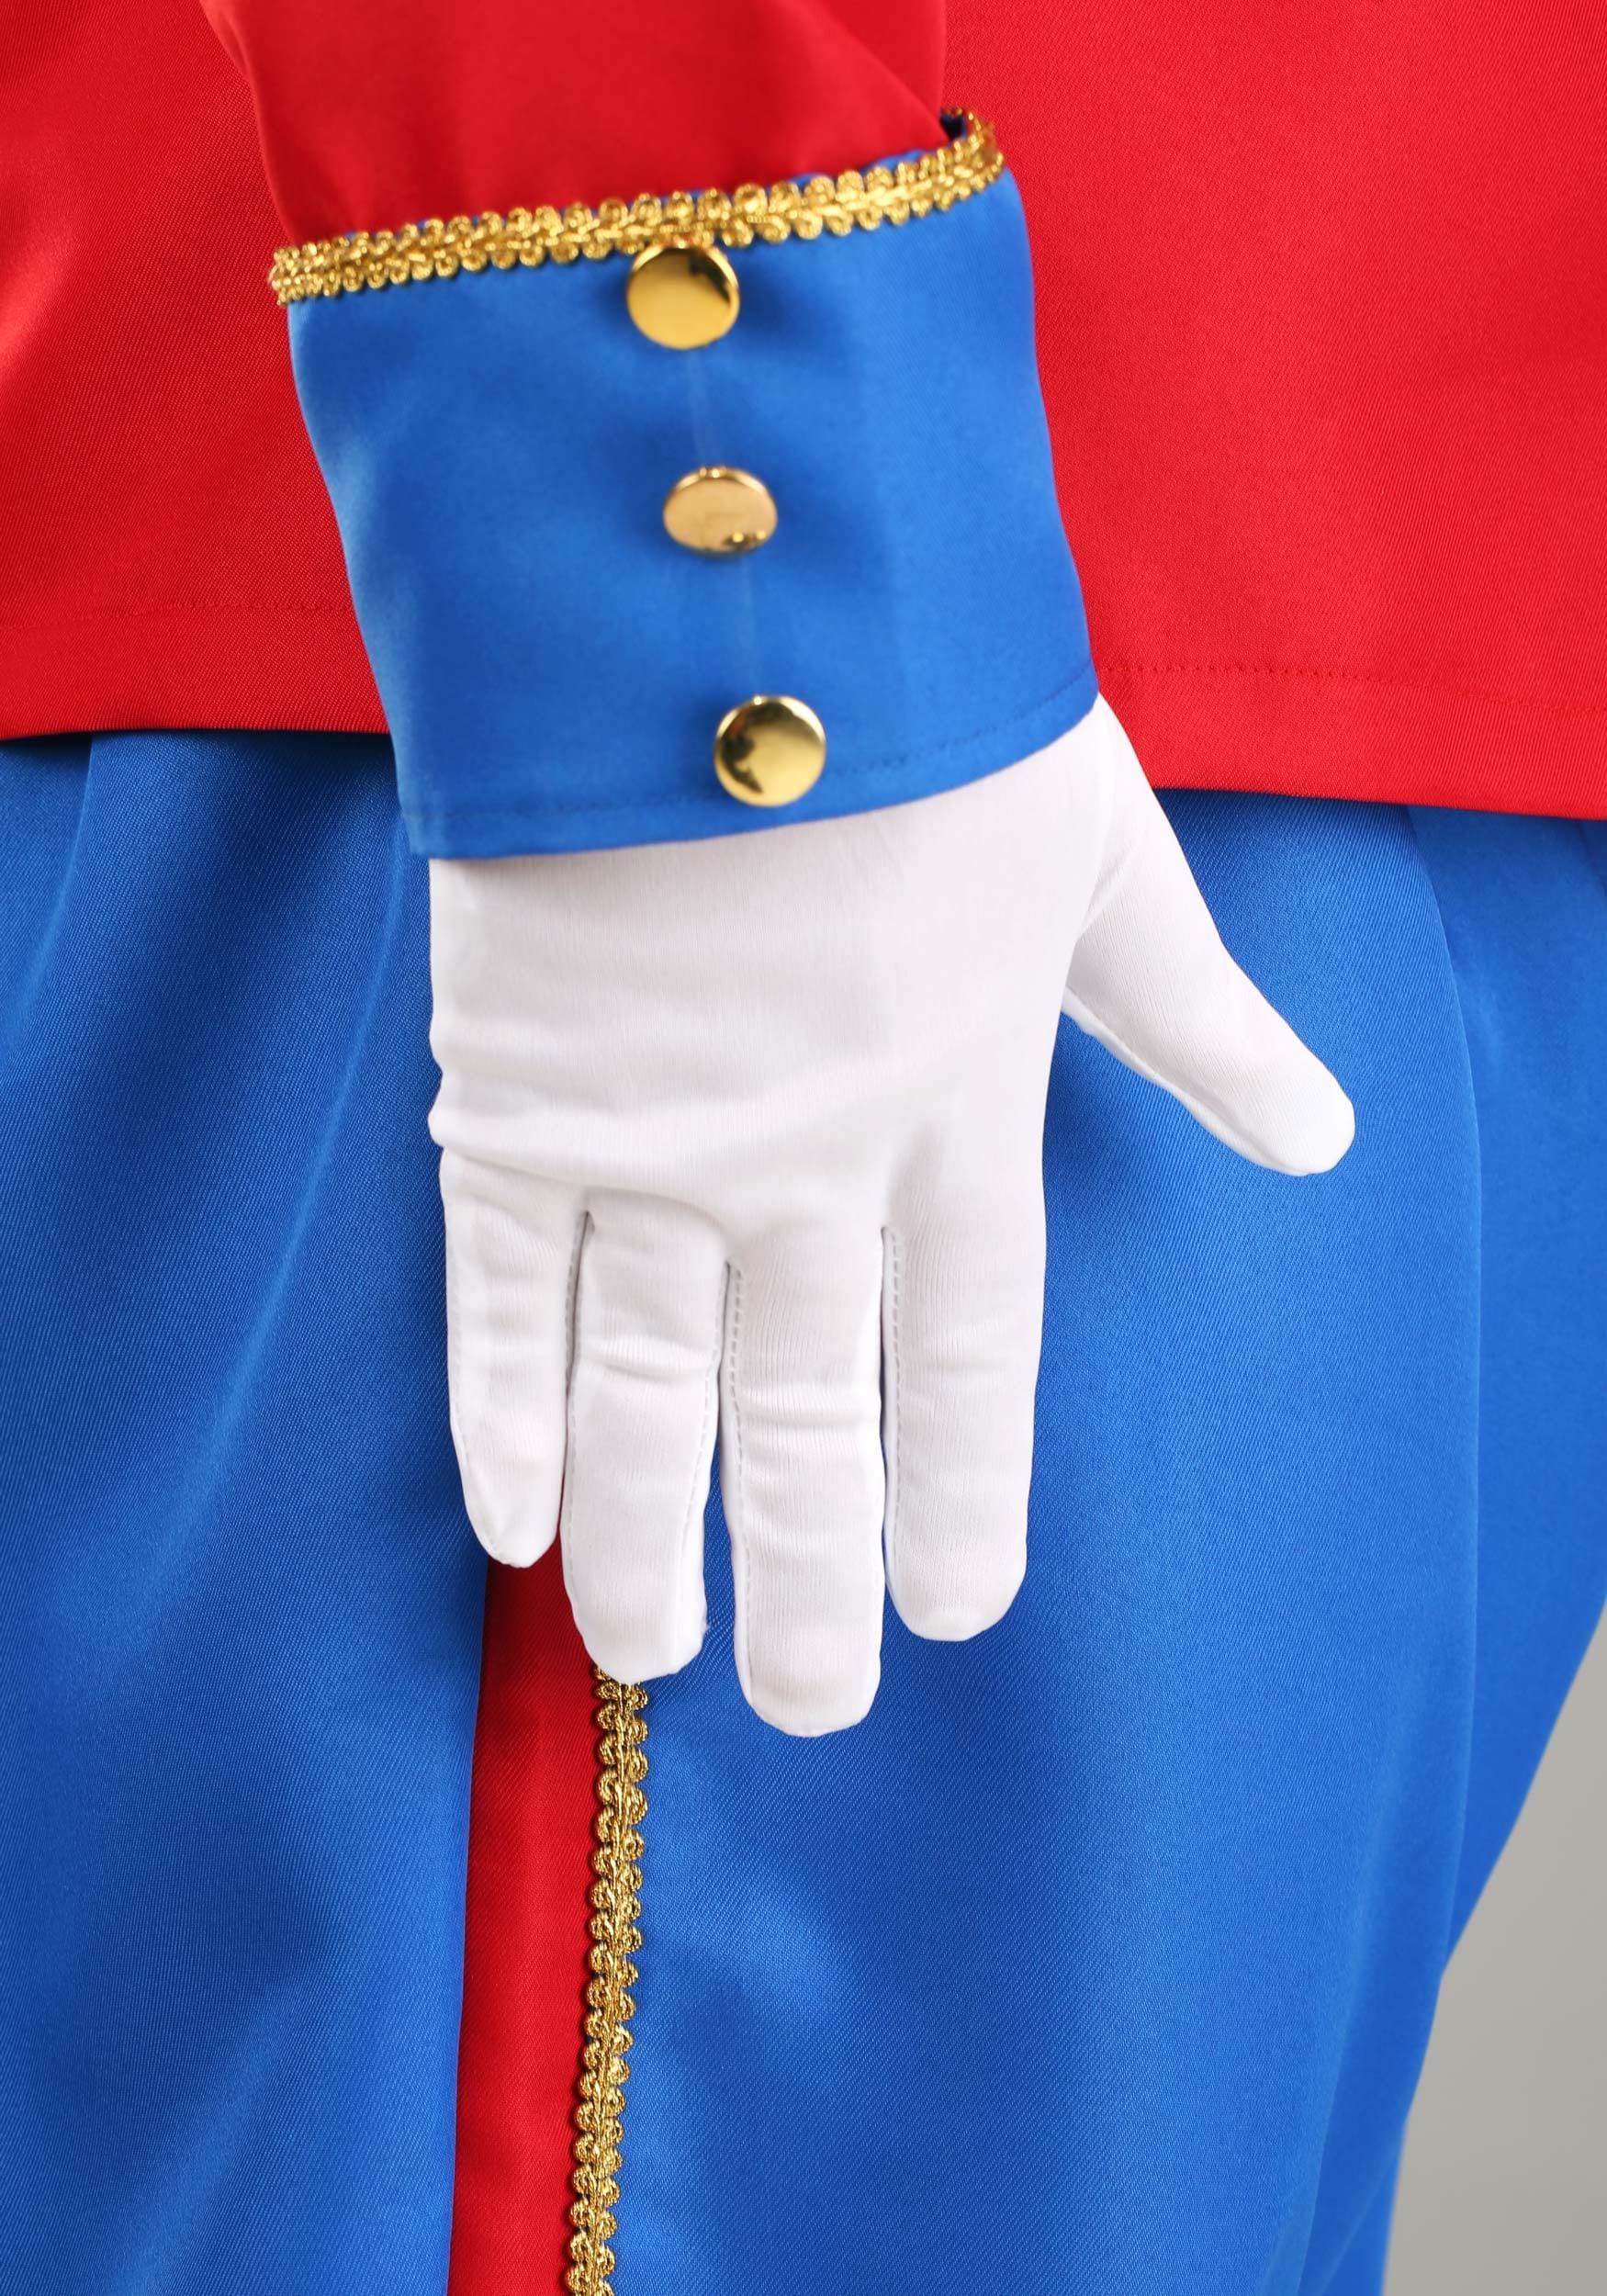 Plus Size Toy Soldier Costume For Men